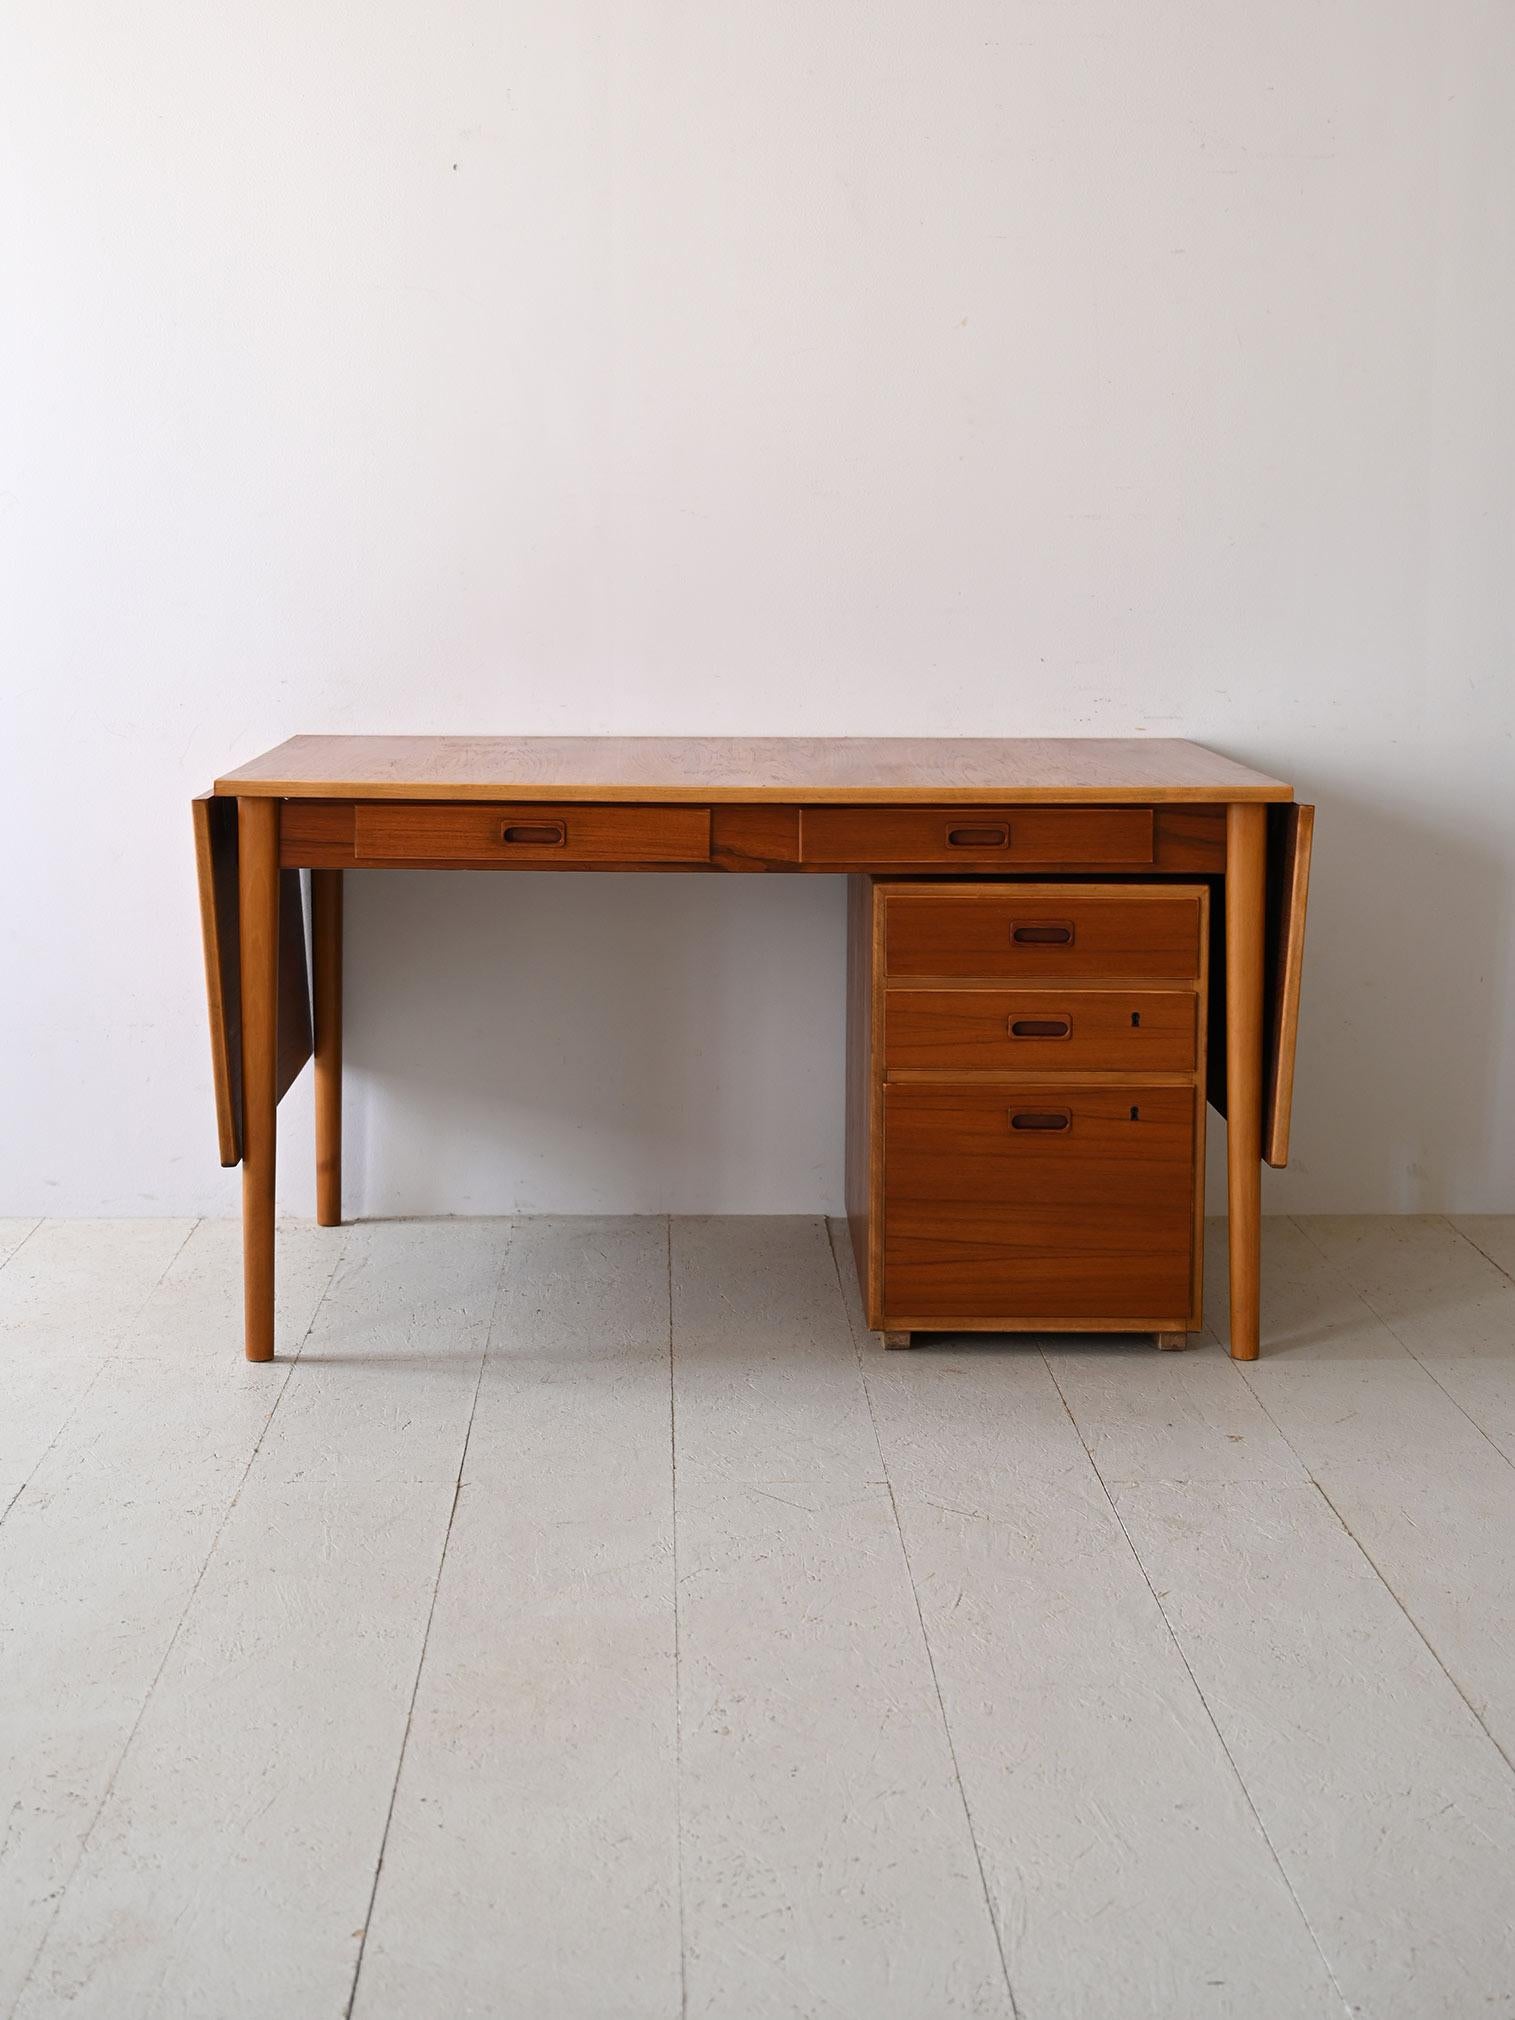 Scandinavian Modern Retro desk by Nils Jonsson with drawers For Sale